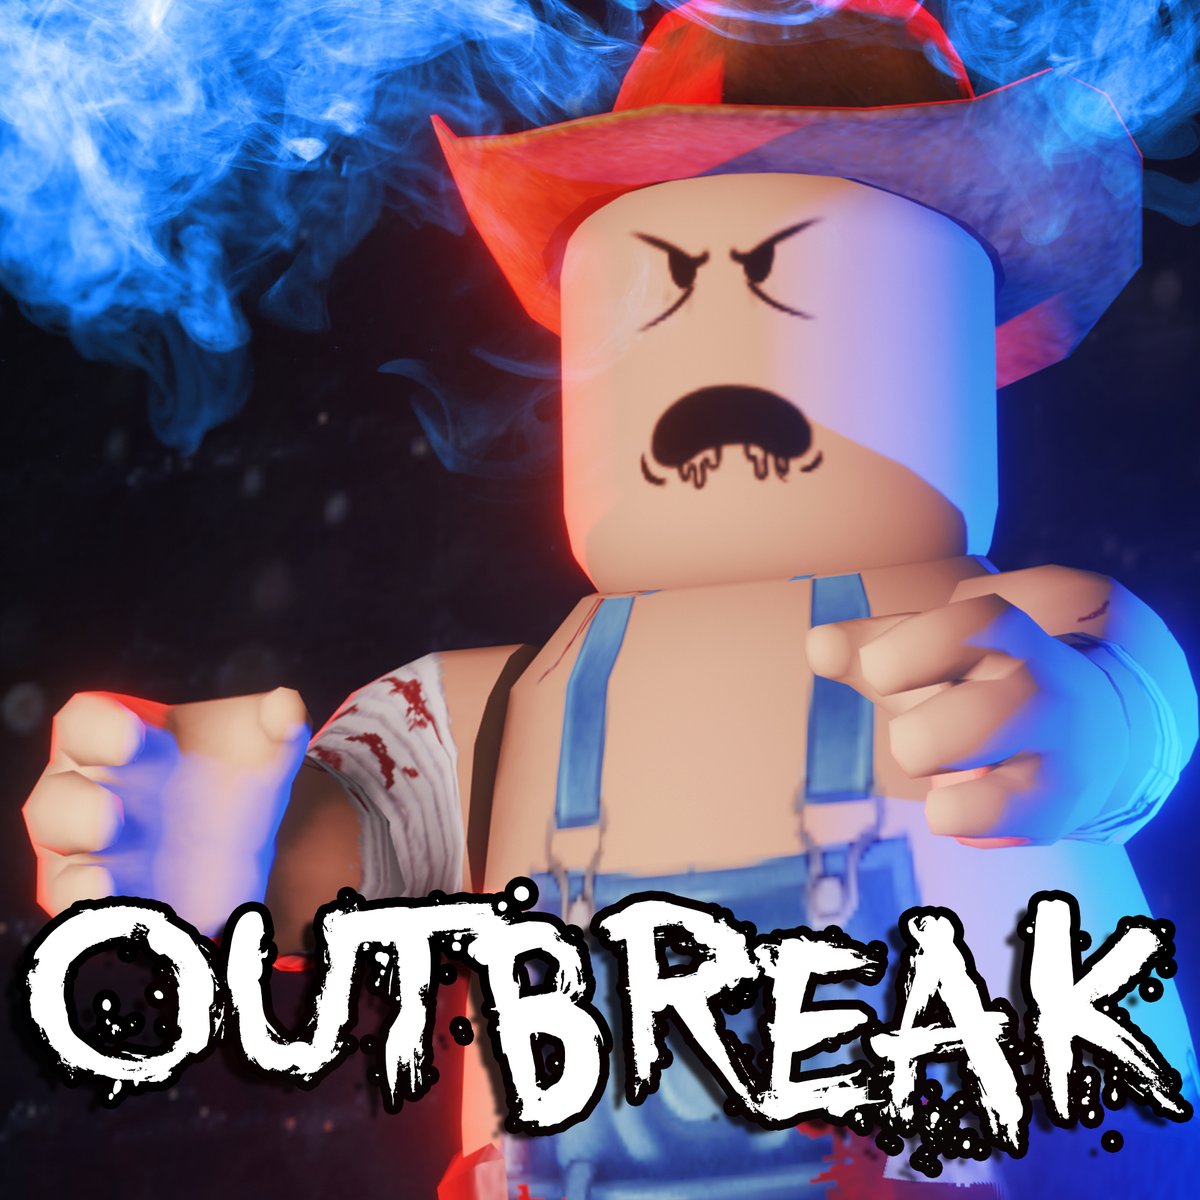 Wonuf Josh On Twitter Outbreak Chapter 2 Hangar Is Now Out Https T Co Cevxkqnqfo Featuring A New Albertsstuff Cleetus Skin - roblox the game rose chapter two